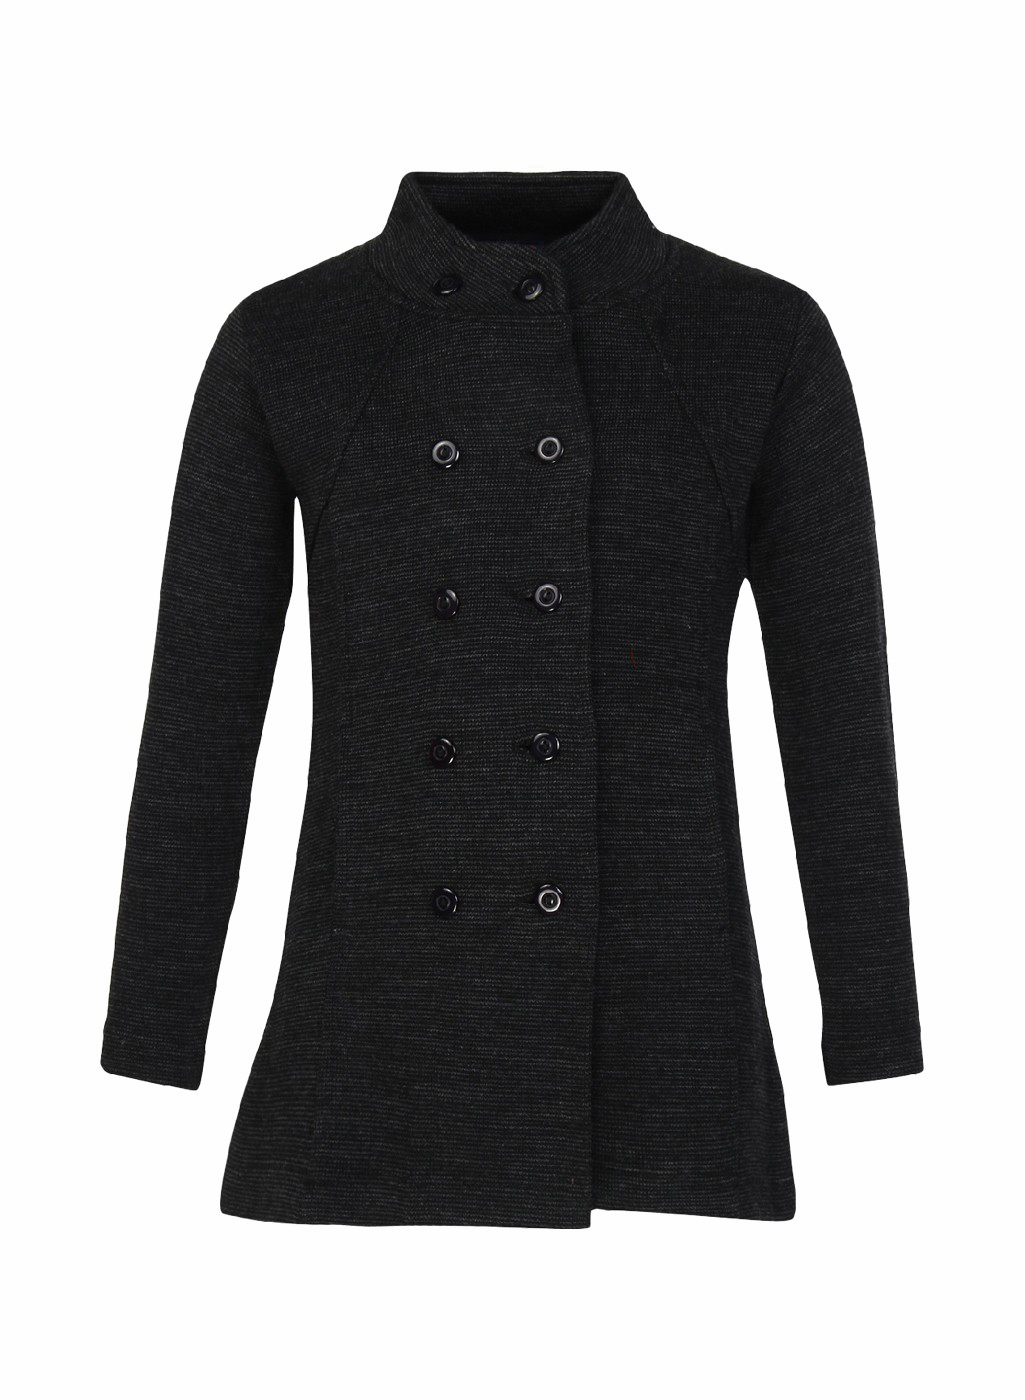 Black Winter Jacket For Women PNG Photo